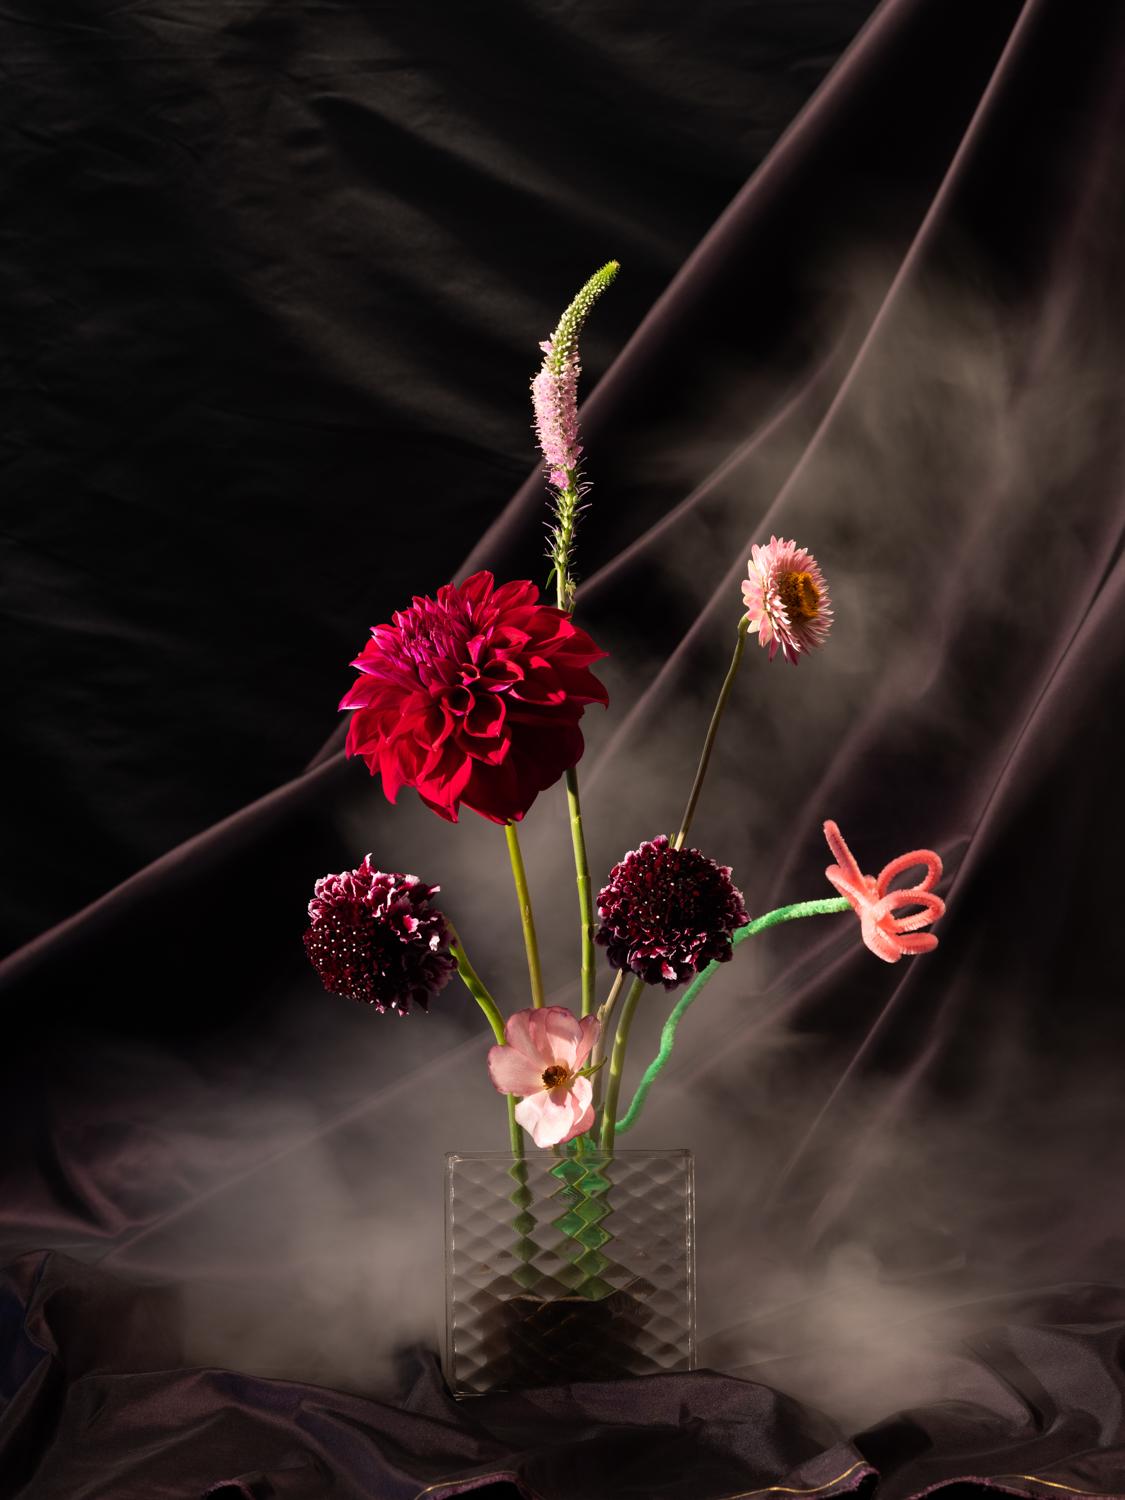 Frances F. Denny Still-Life Photograph - Make of your heart a burning fire (Dahlia, Mournful Widow, Spiked Speedwell...)